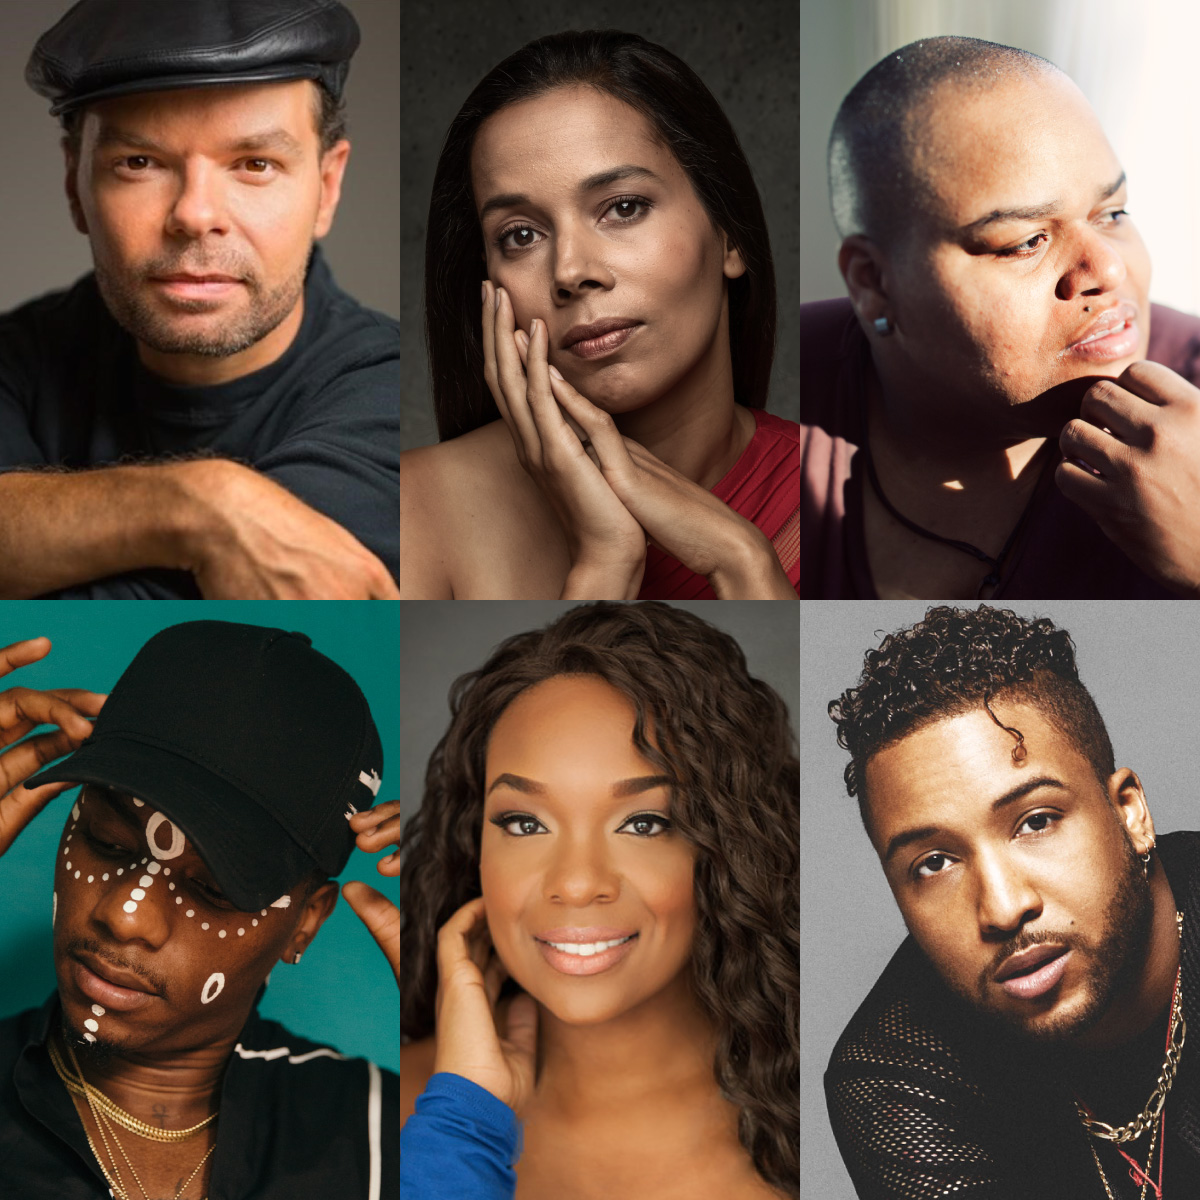 Lemon Andersen, Rhiannon Giddens, Toshi Reagon, Young Paris, Carrie Compere, and Ro James